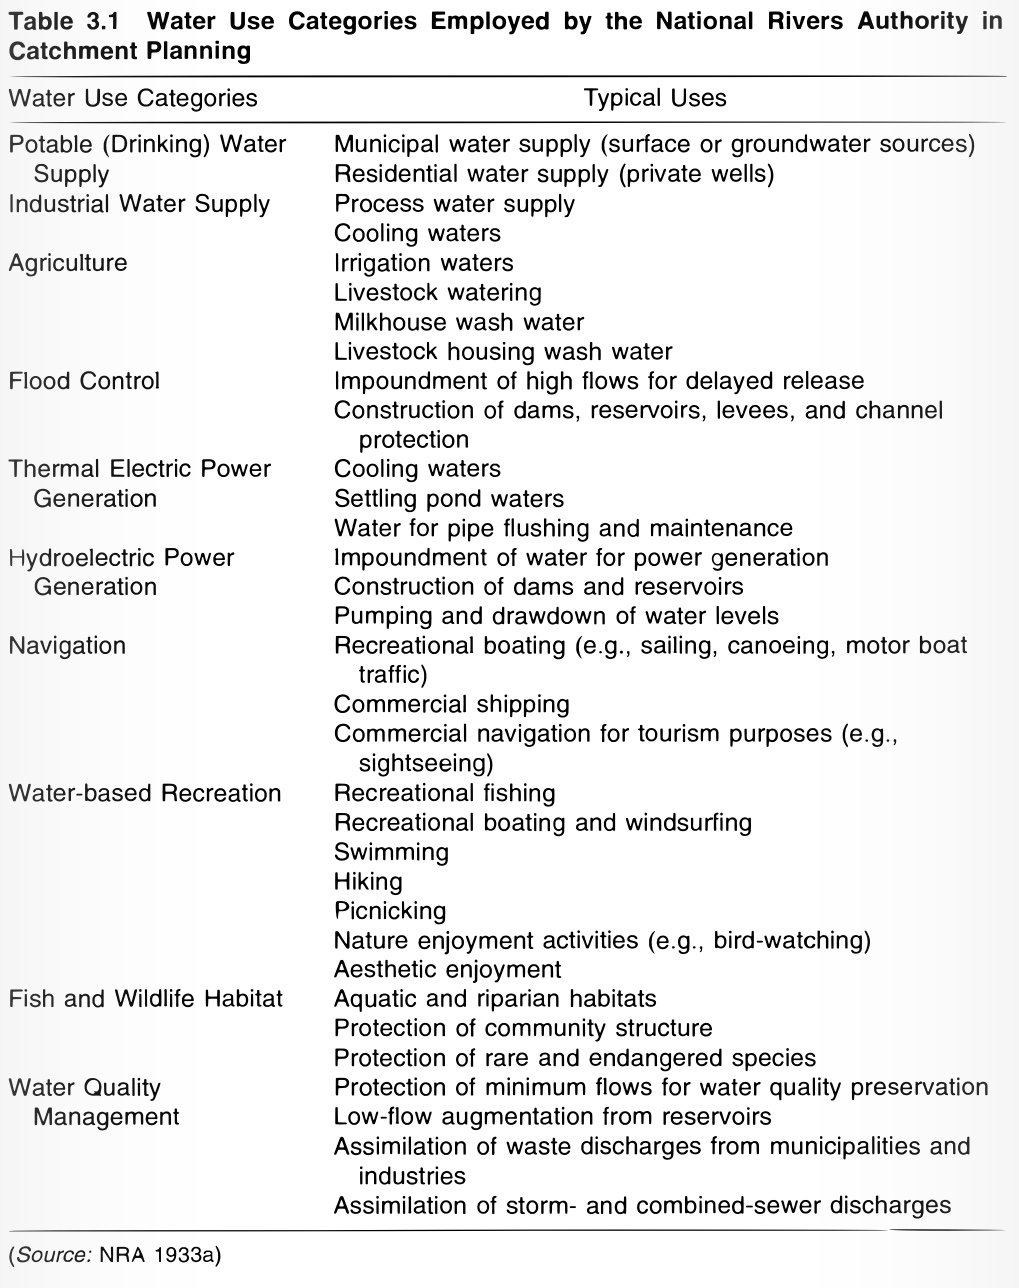 Water Use Categories-National River Authority.jpeg